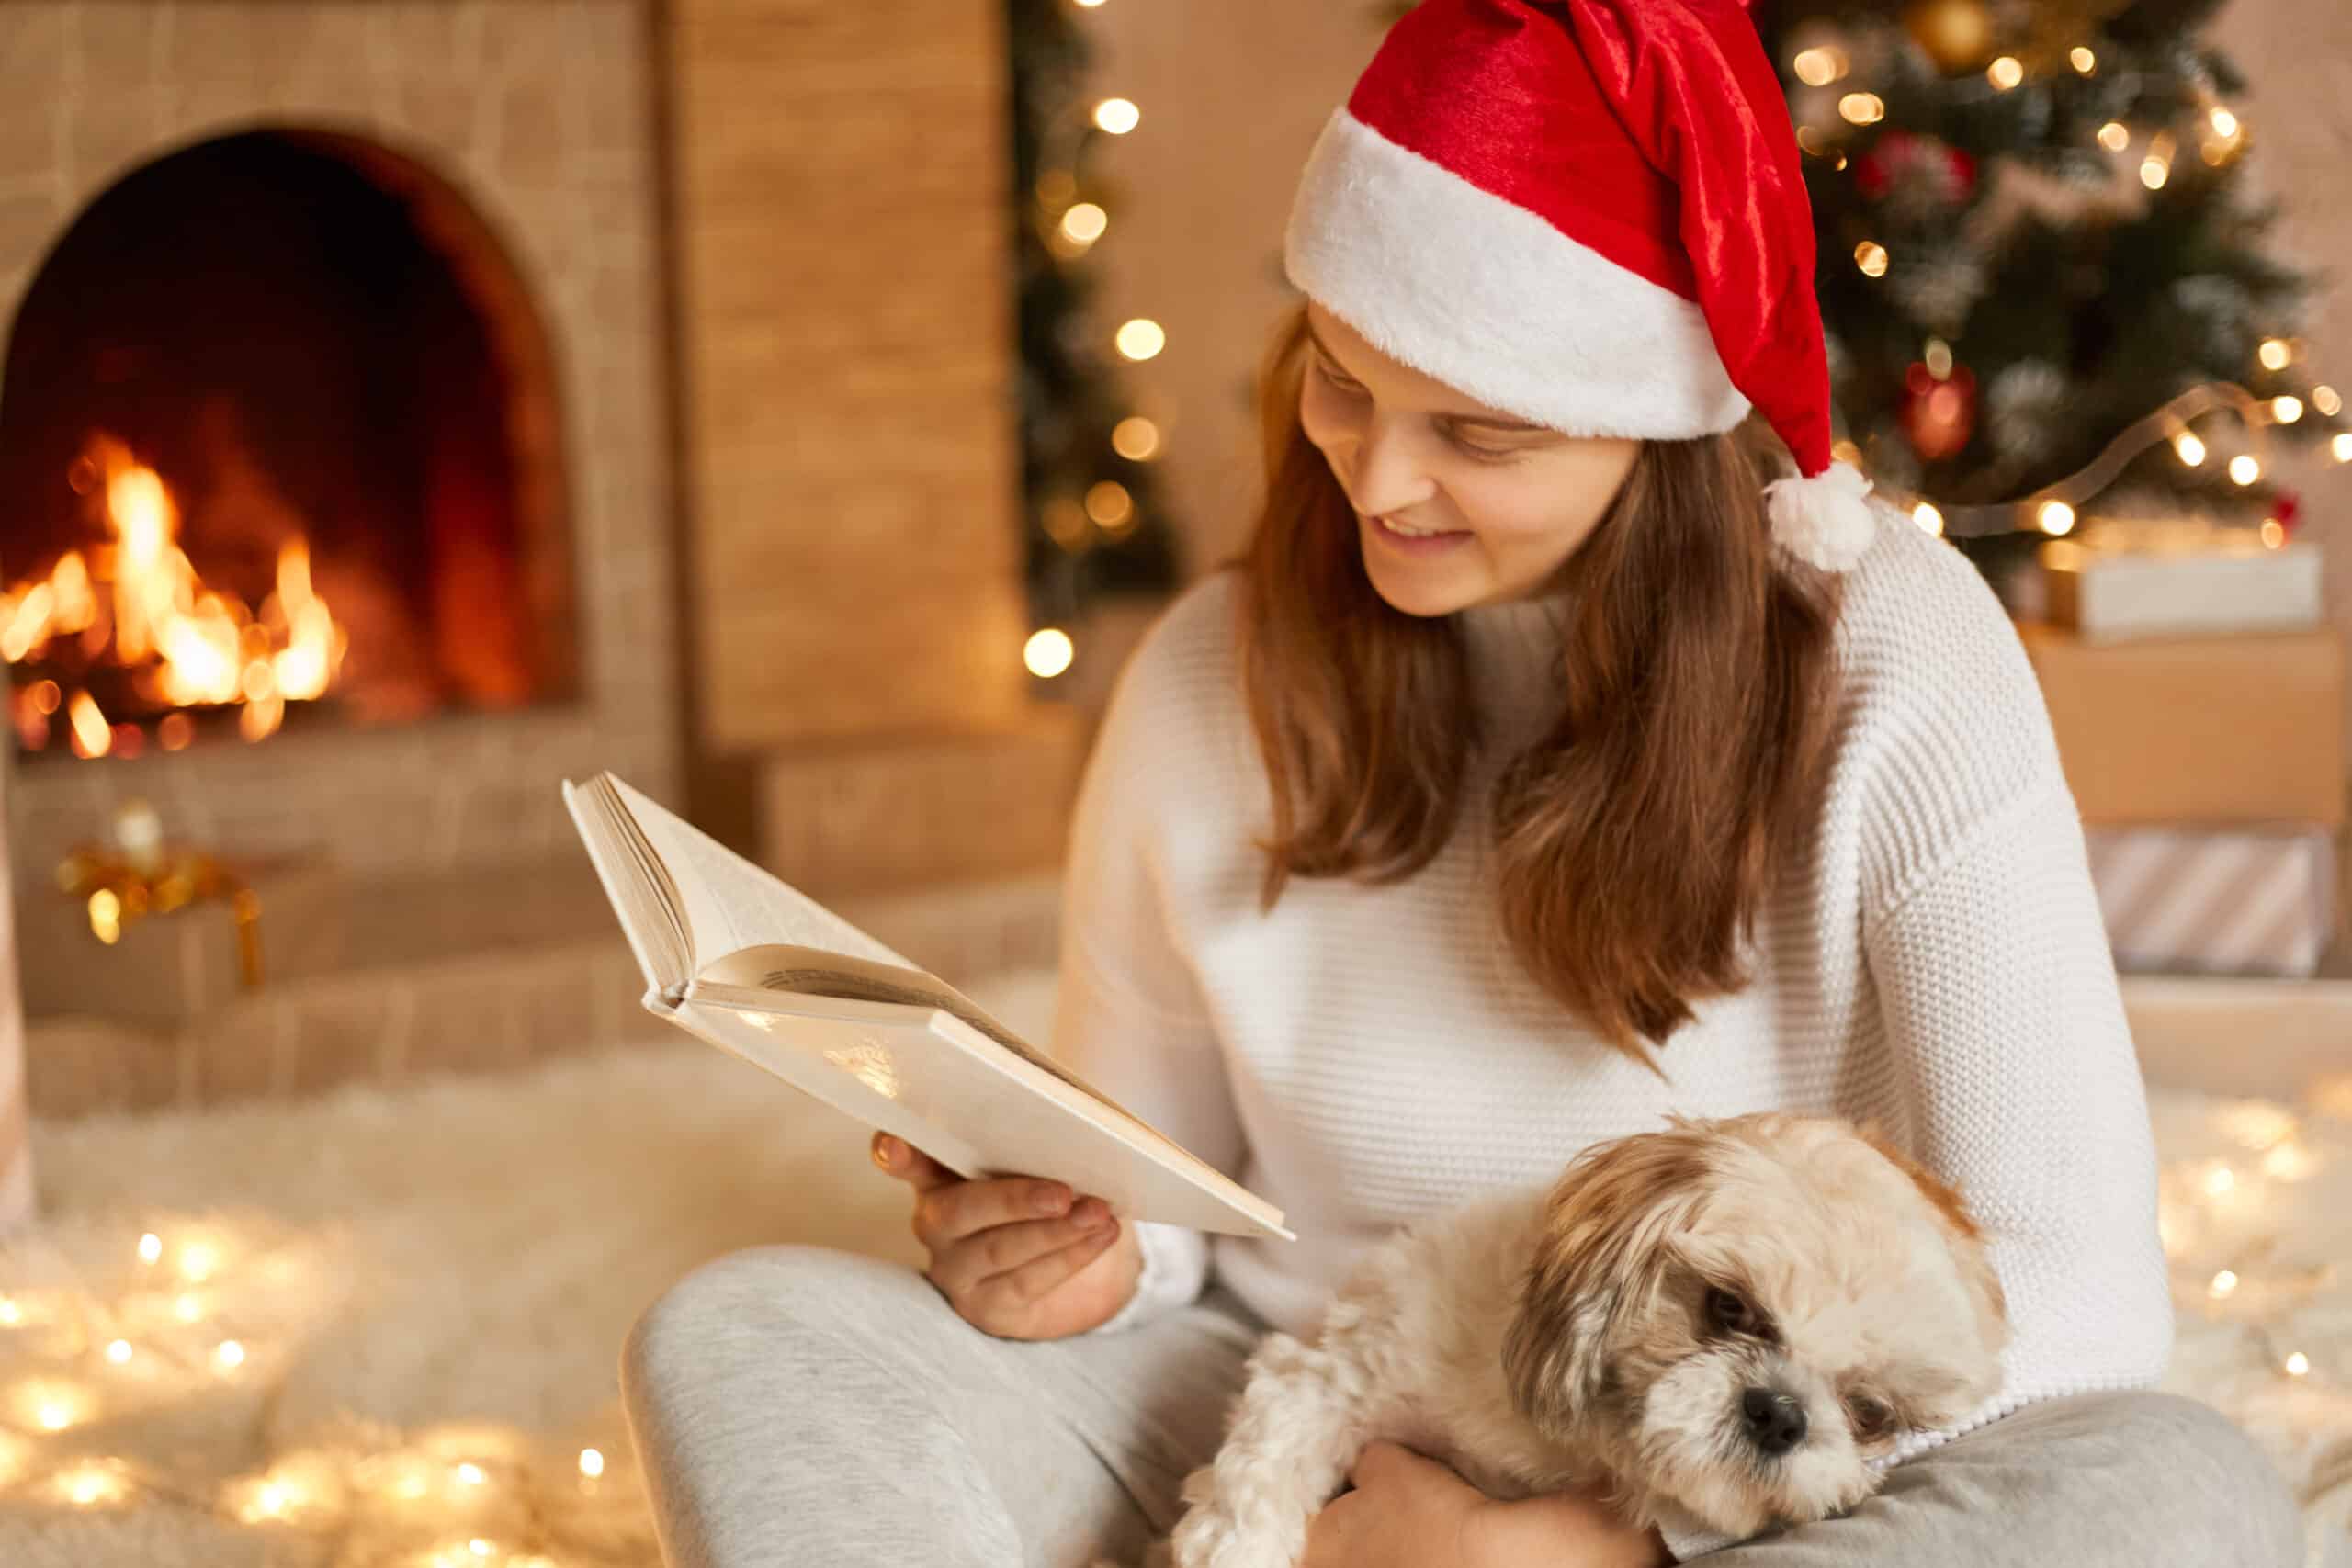 Young woman at home reading book with dog on her knees, looking at pages, wearing casual attire and red festive hat, posing in living room with fireplace and xmas tree on background.